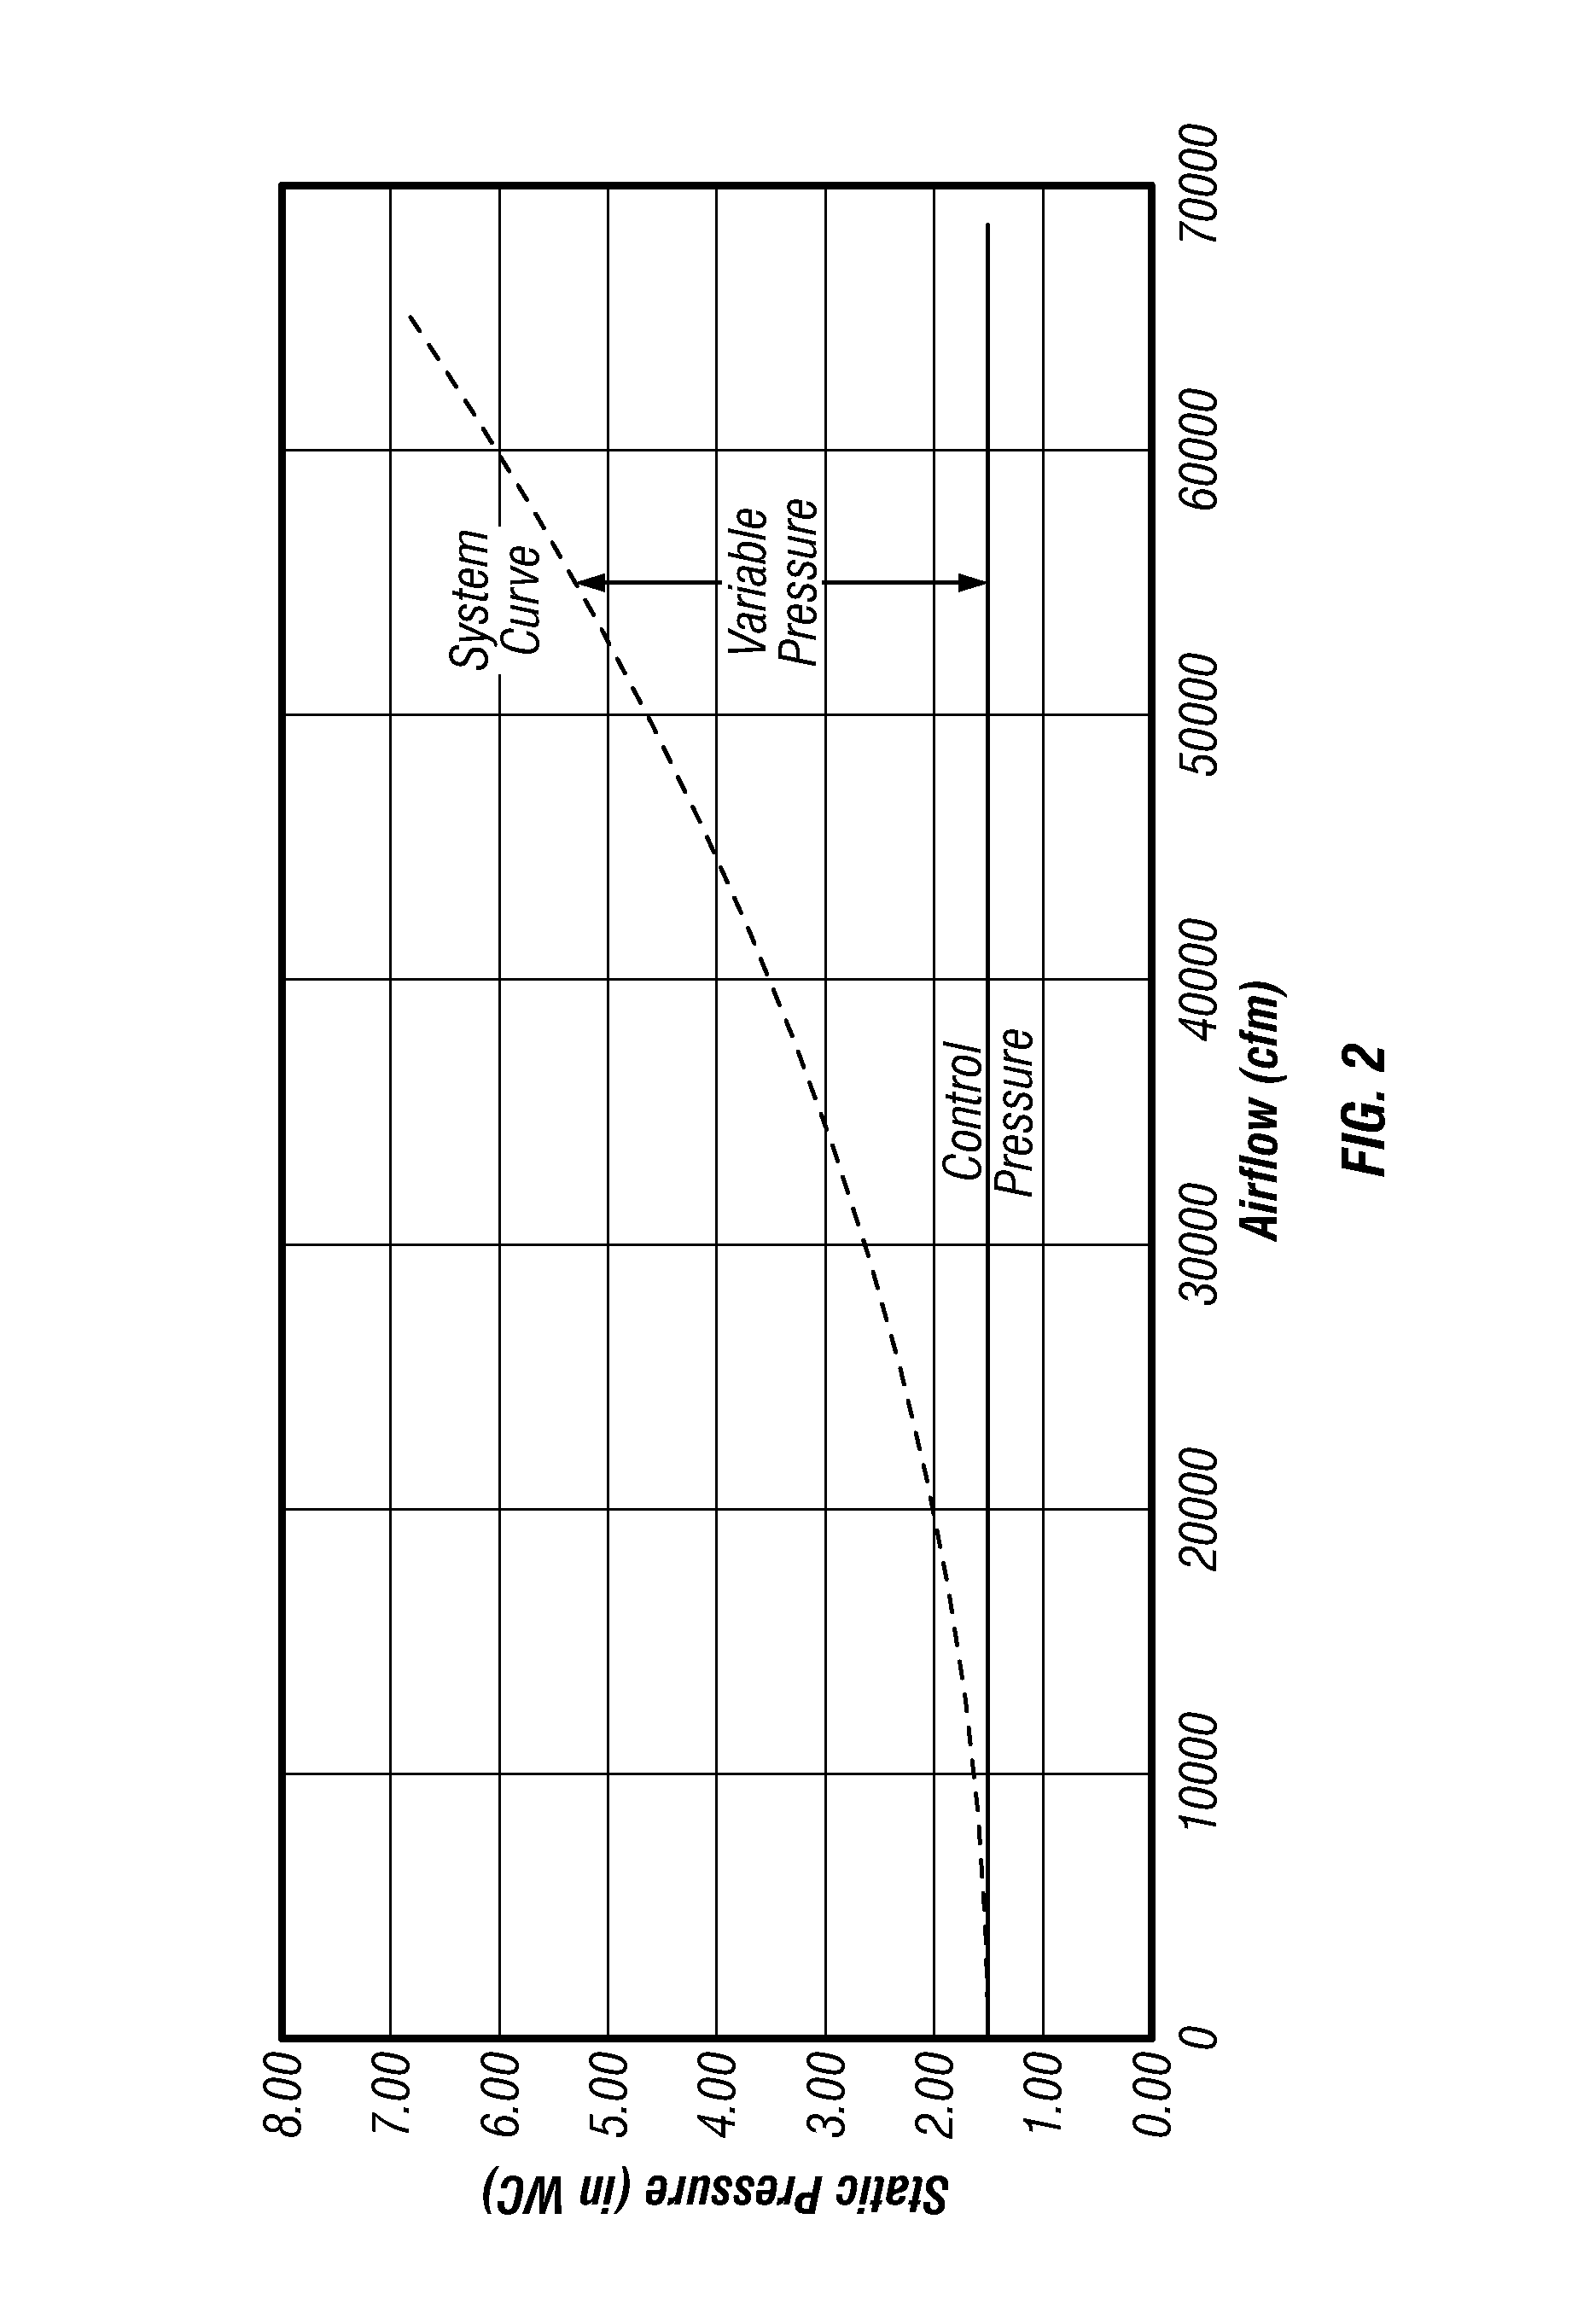 Fan system comprising fan array with surge control